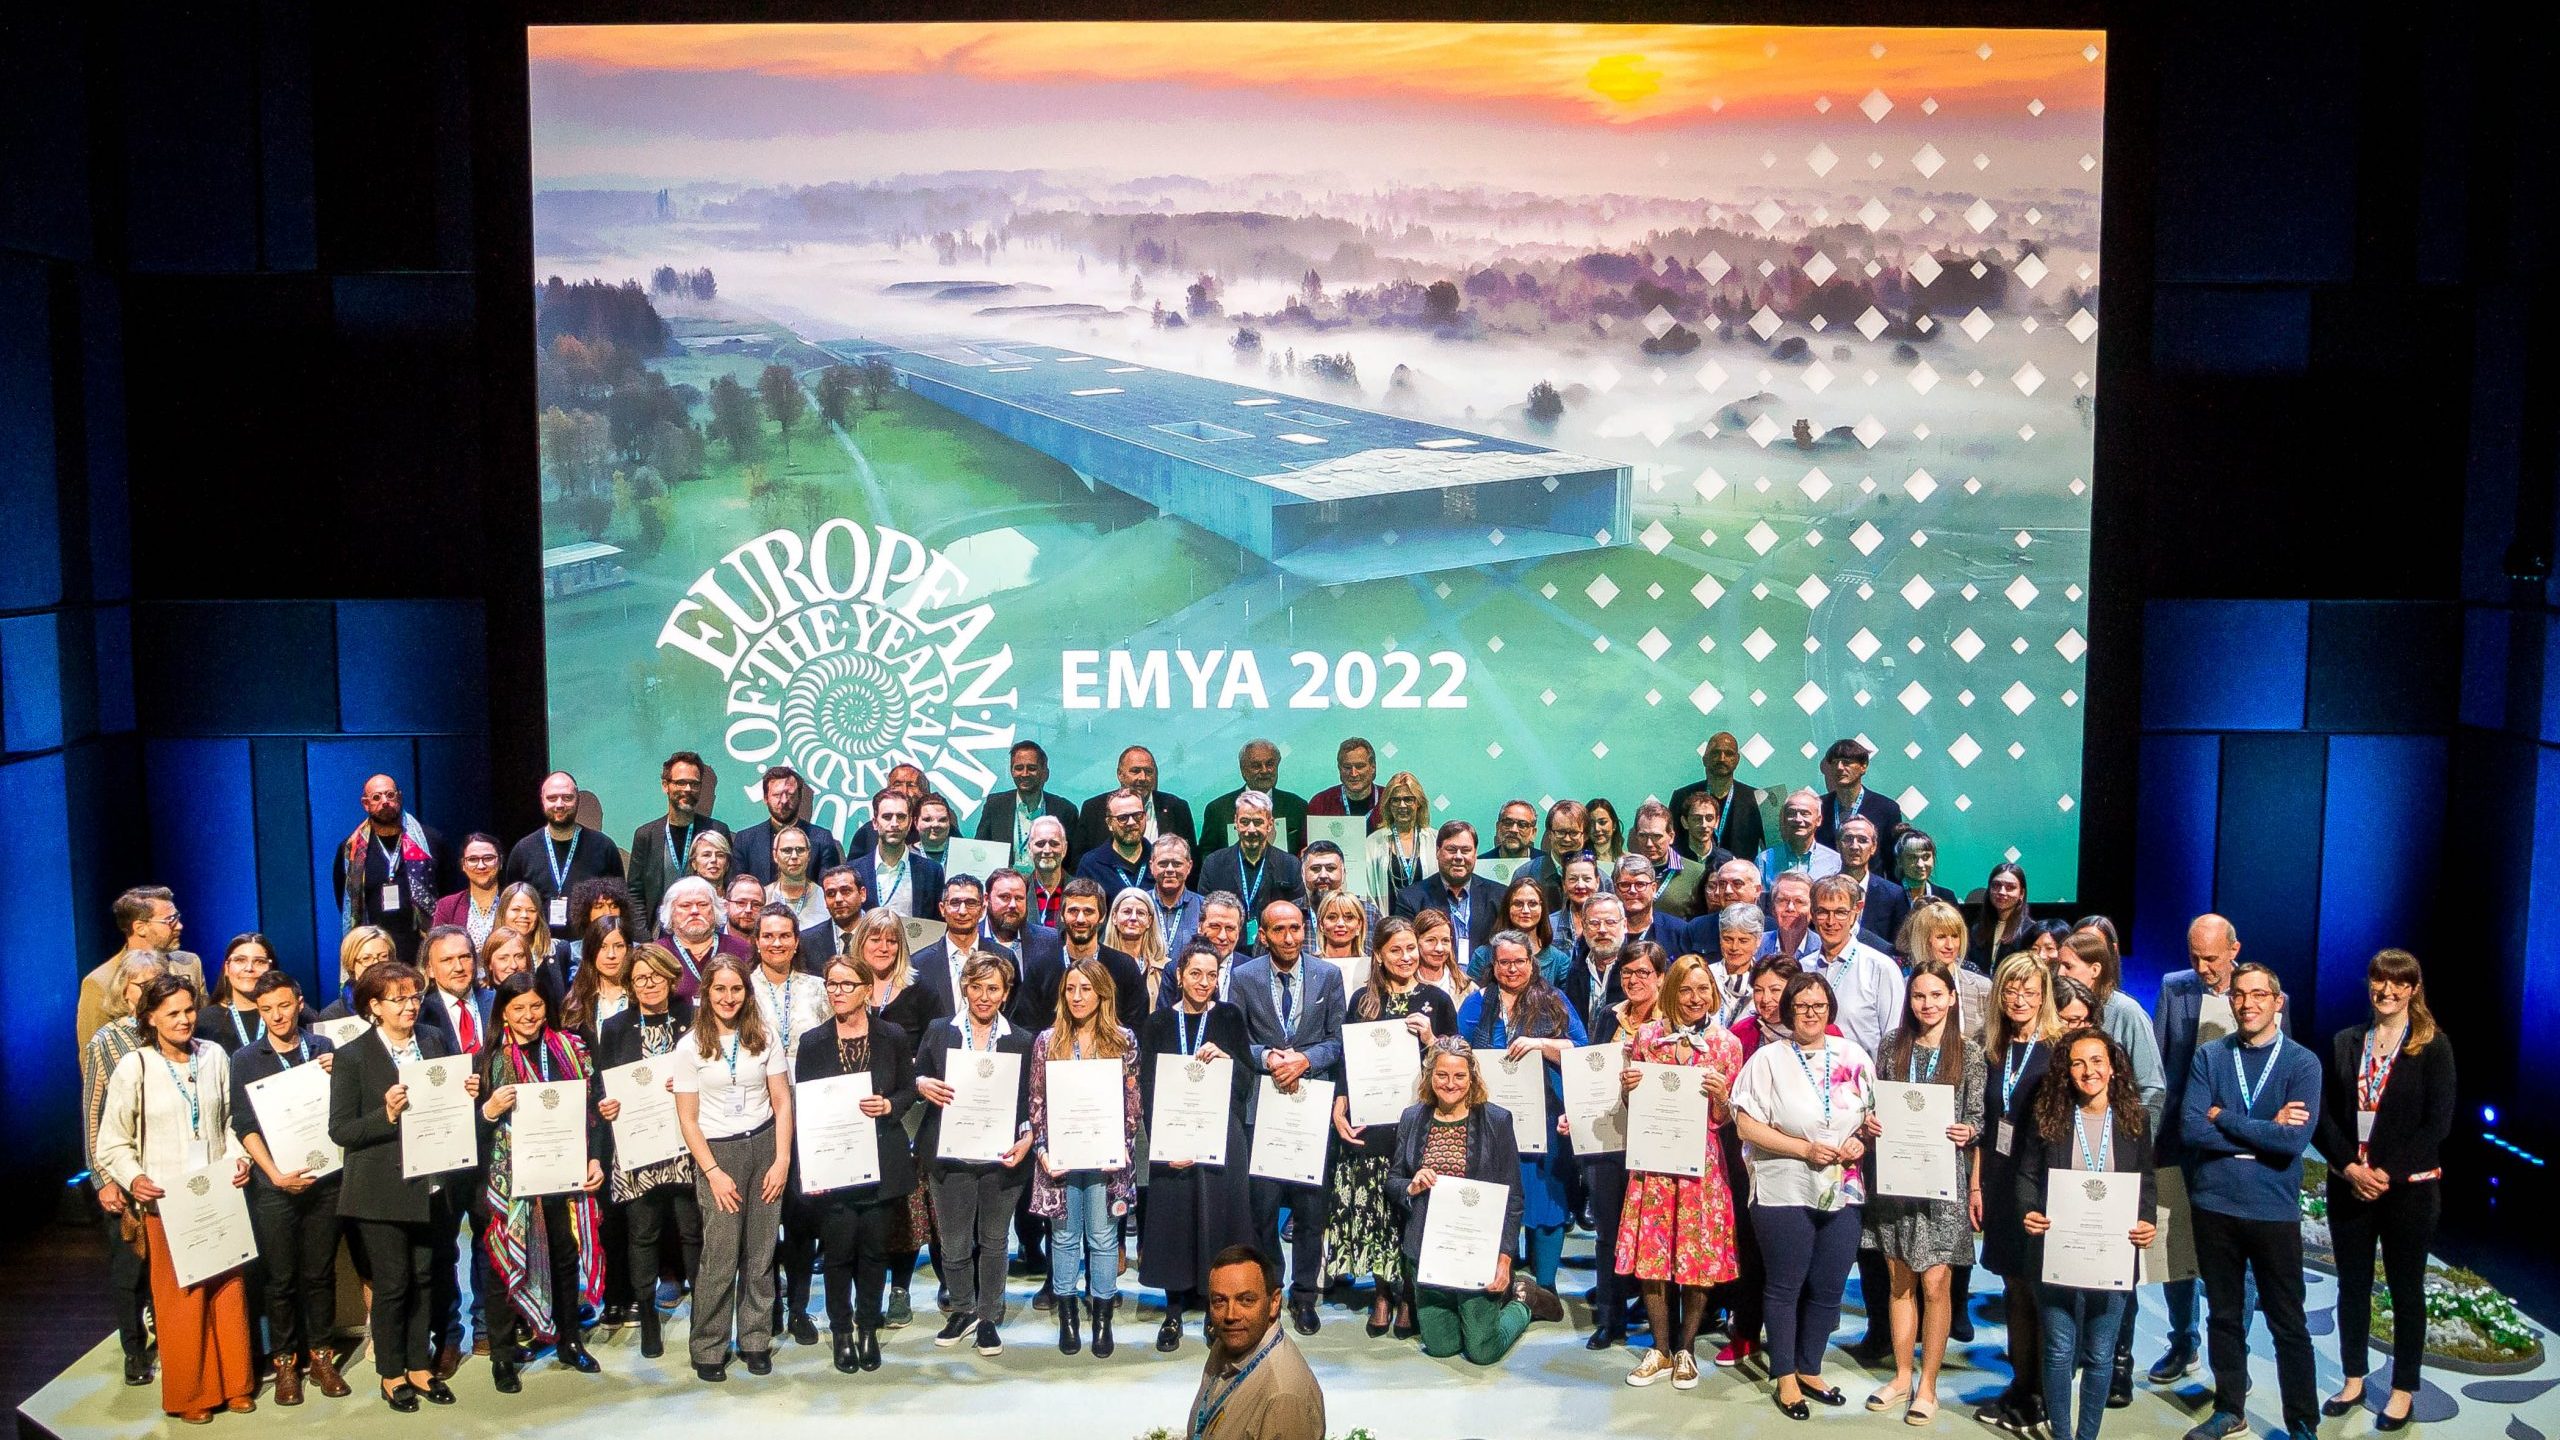 Emya 2022 nominated museums during the certificate giving in Tartu, Estonia